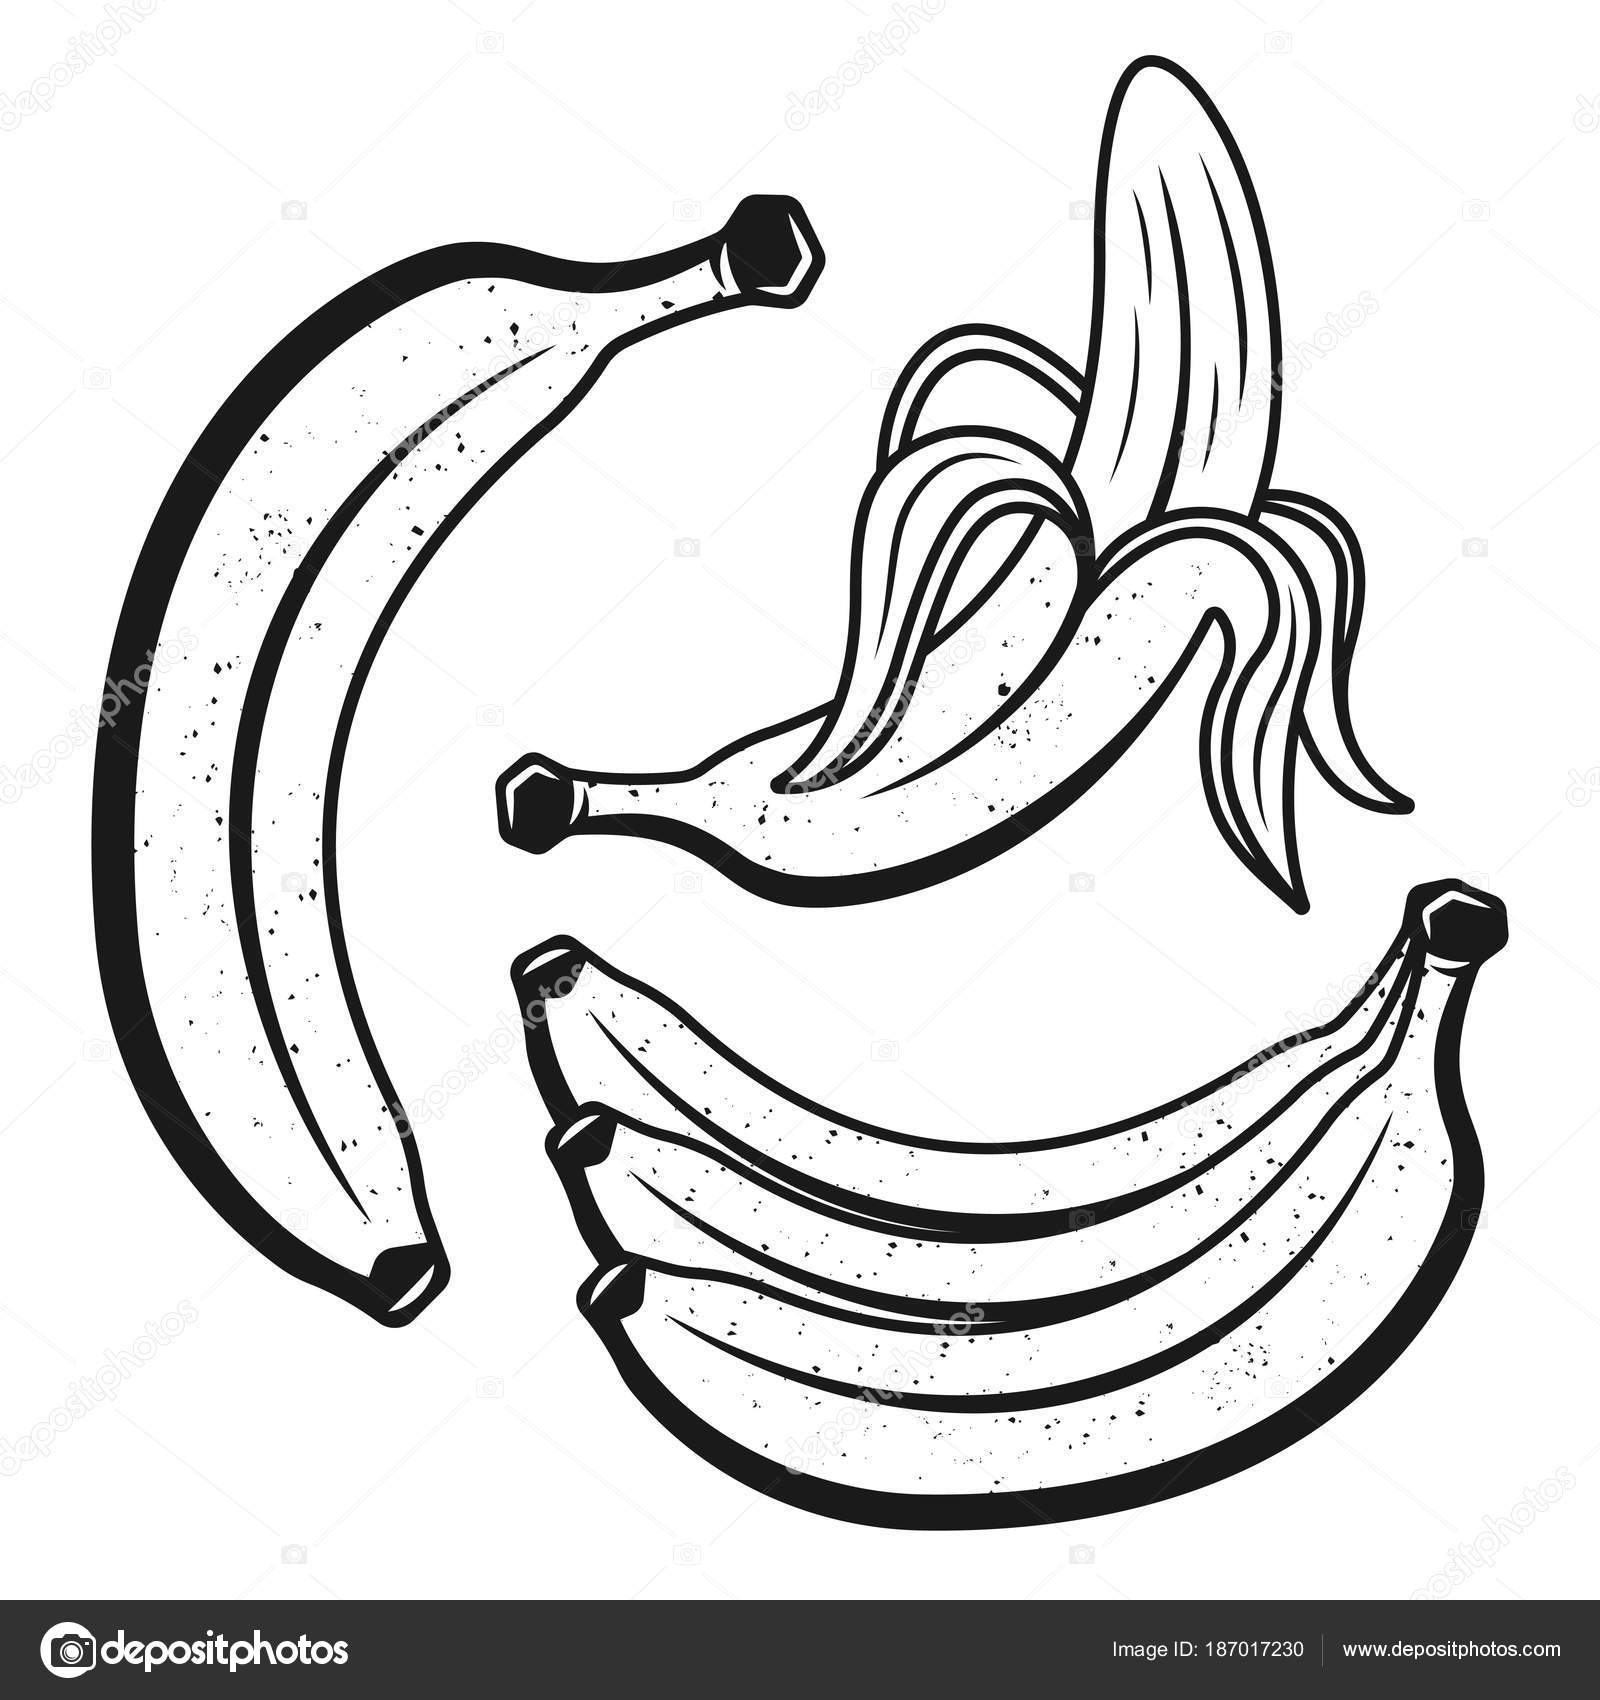 Set Of Bananas Monochrome Vector Objects Or Design Elements On White Background Stock Vector C Flat Enot 187017230